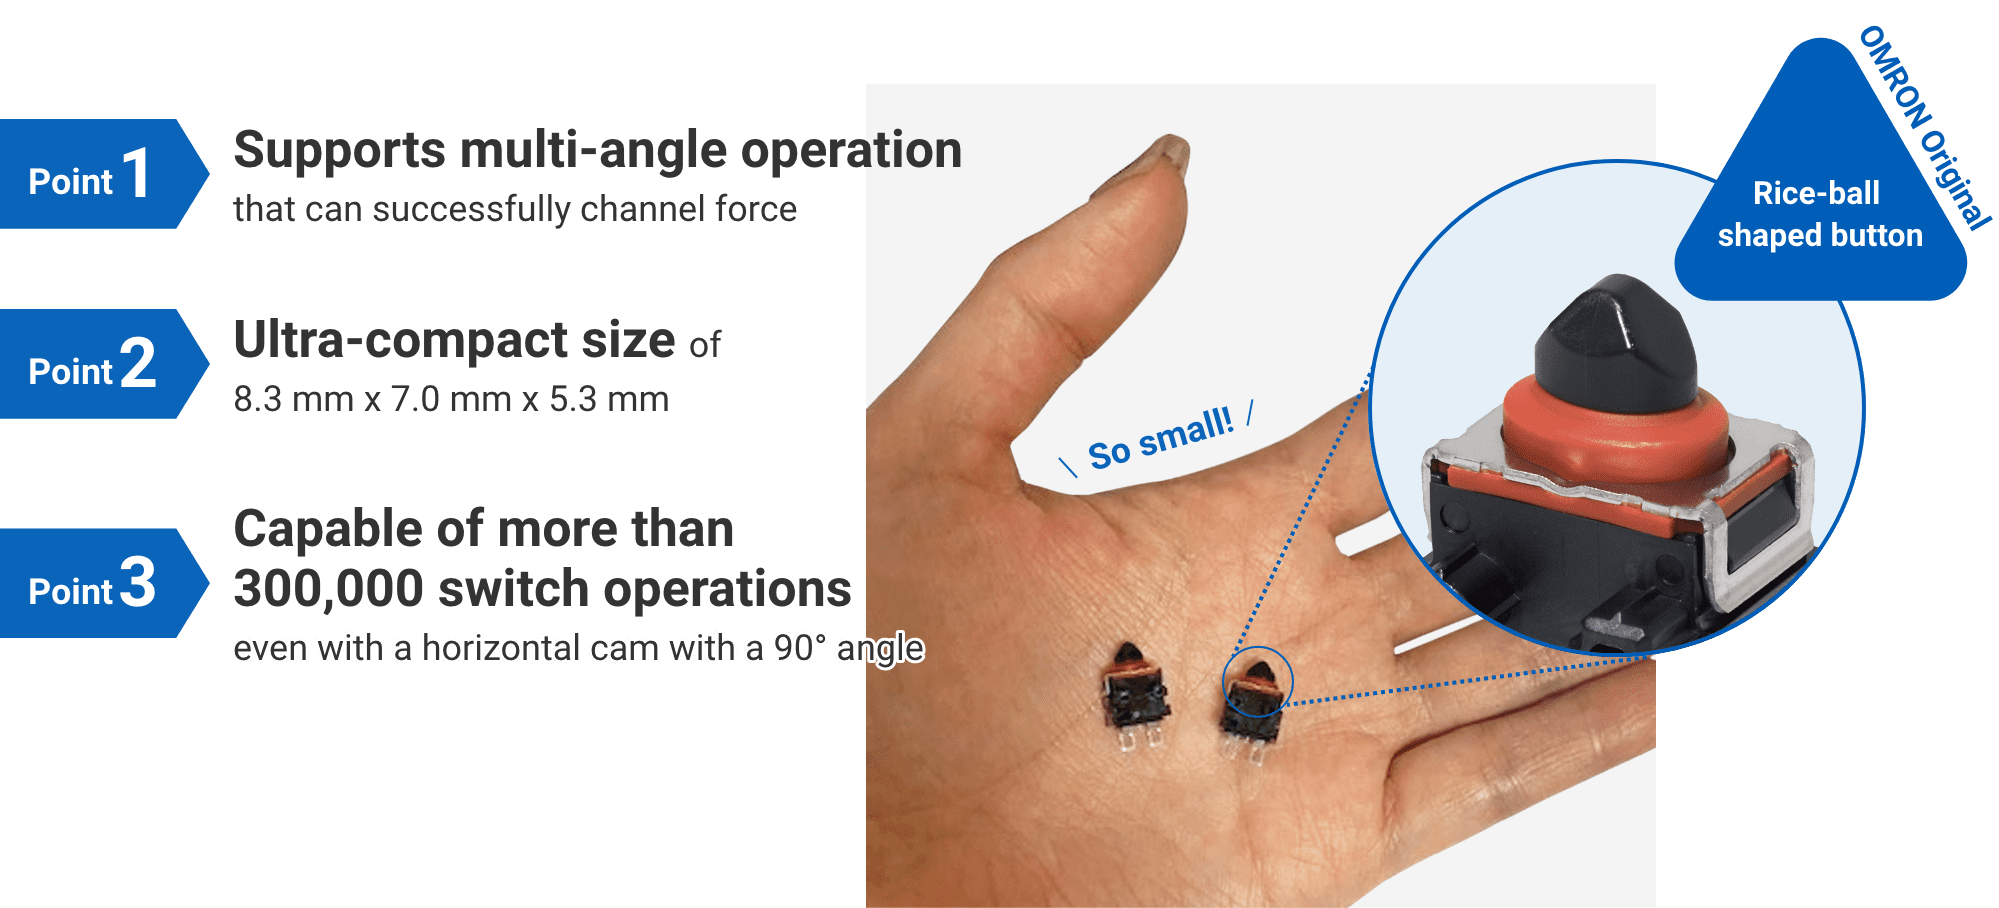 Point1:Supports multi-angle operation that can successfully channel force, Point2:Ultra-compact size of 8.3 mm x 7.0 mm x 5.3 mm, Point3:Capable of more than 300,000 switch operations even with a horizontal cam with a 90° angle